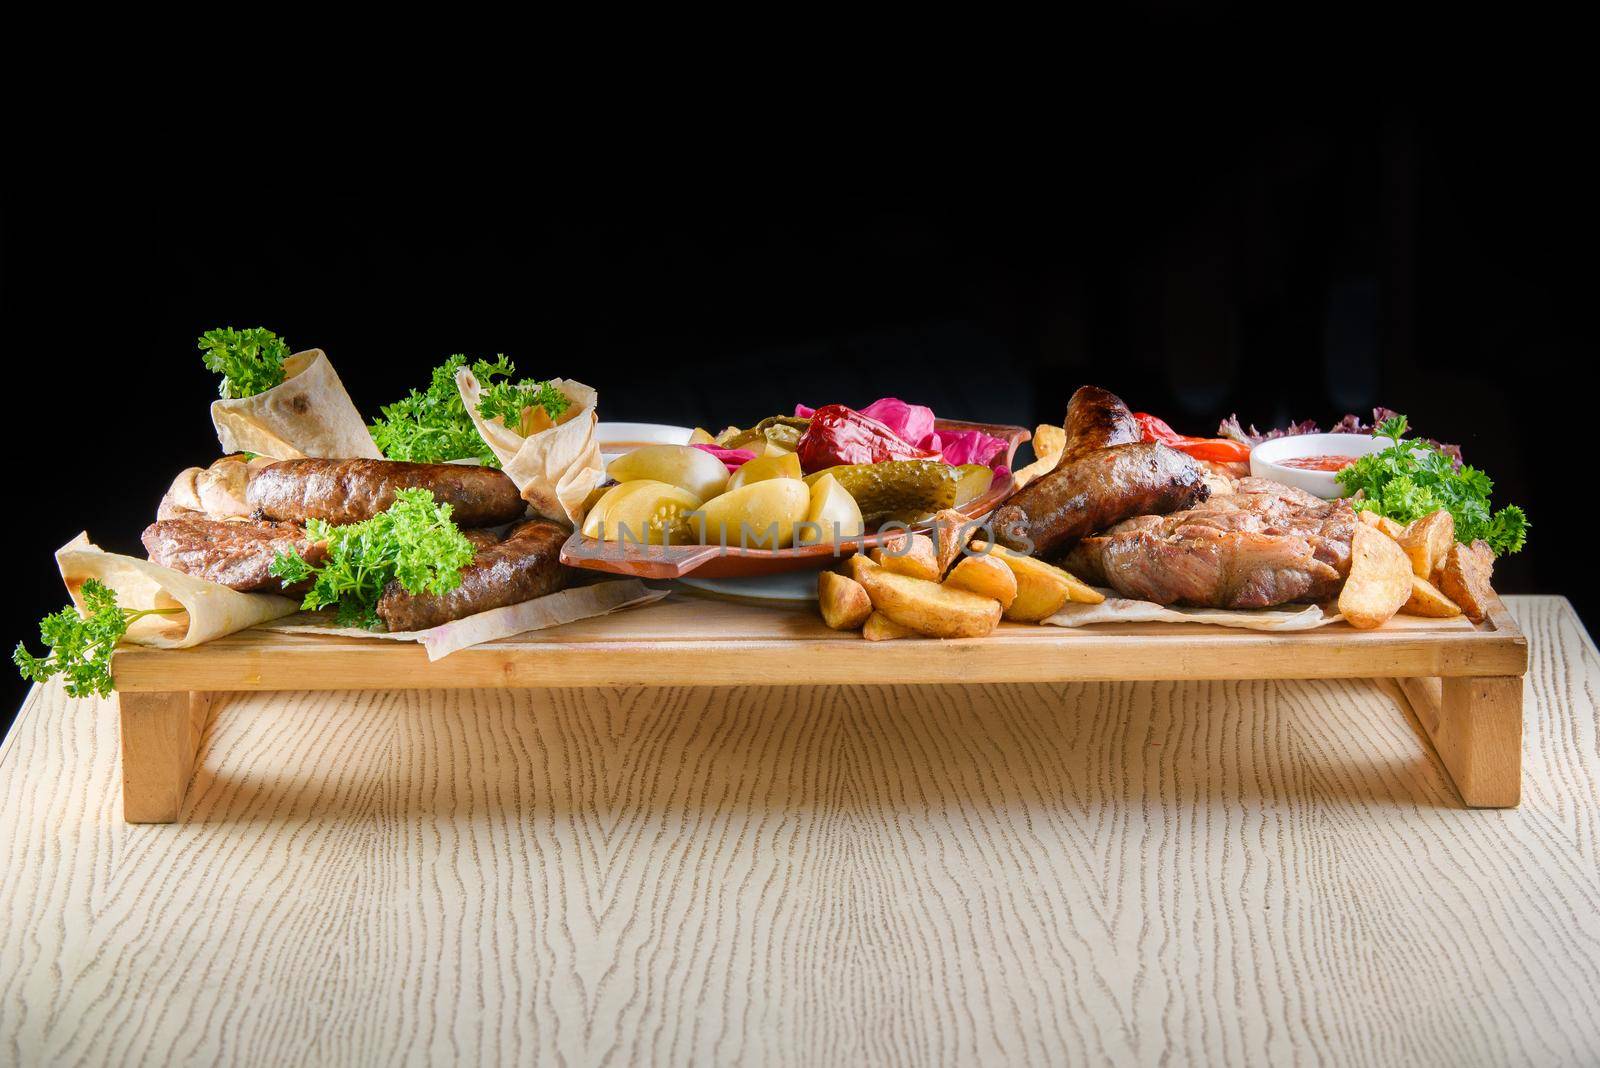 Assortment of fried meat, potatoes, sausages, pickles, tomatoes, peppers, herbs, lavash on a wooden tray on the table.